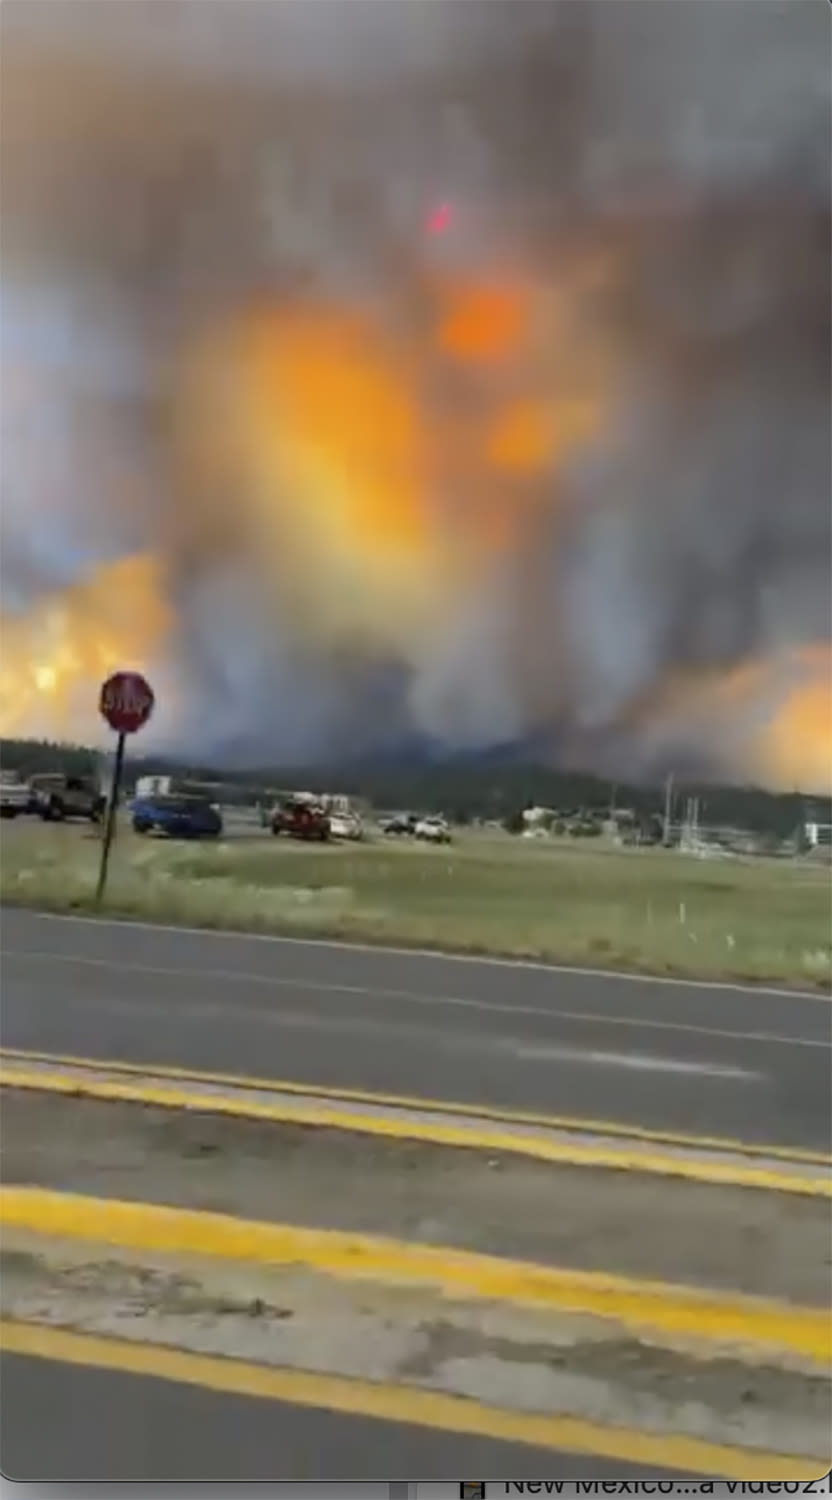 At least 1 dead in New Mexico wildfire that forced thousands to flee, governor’s office says